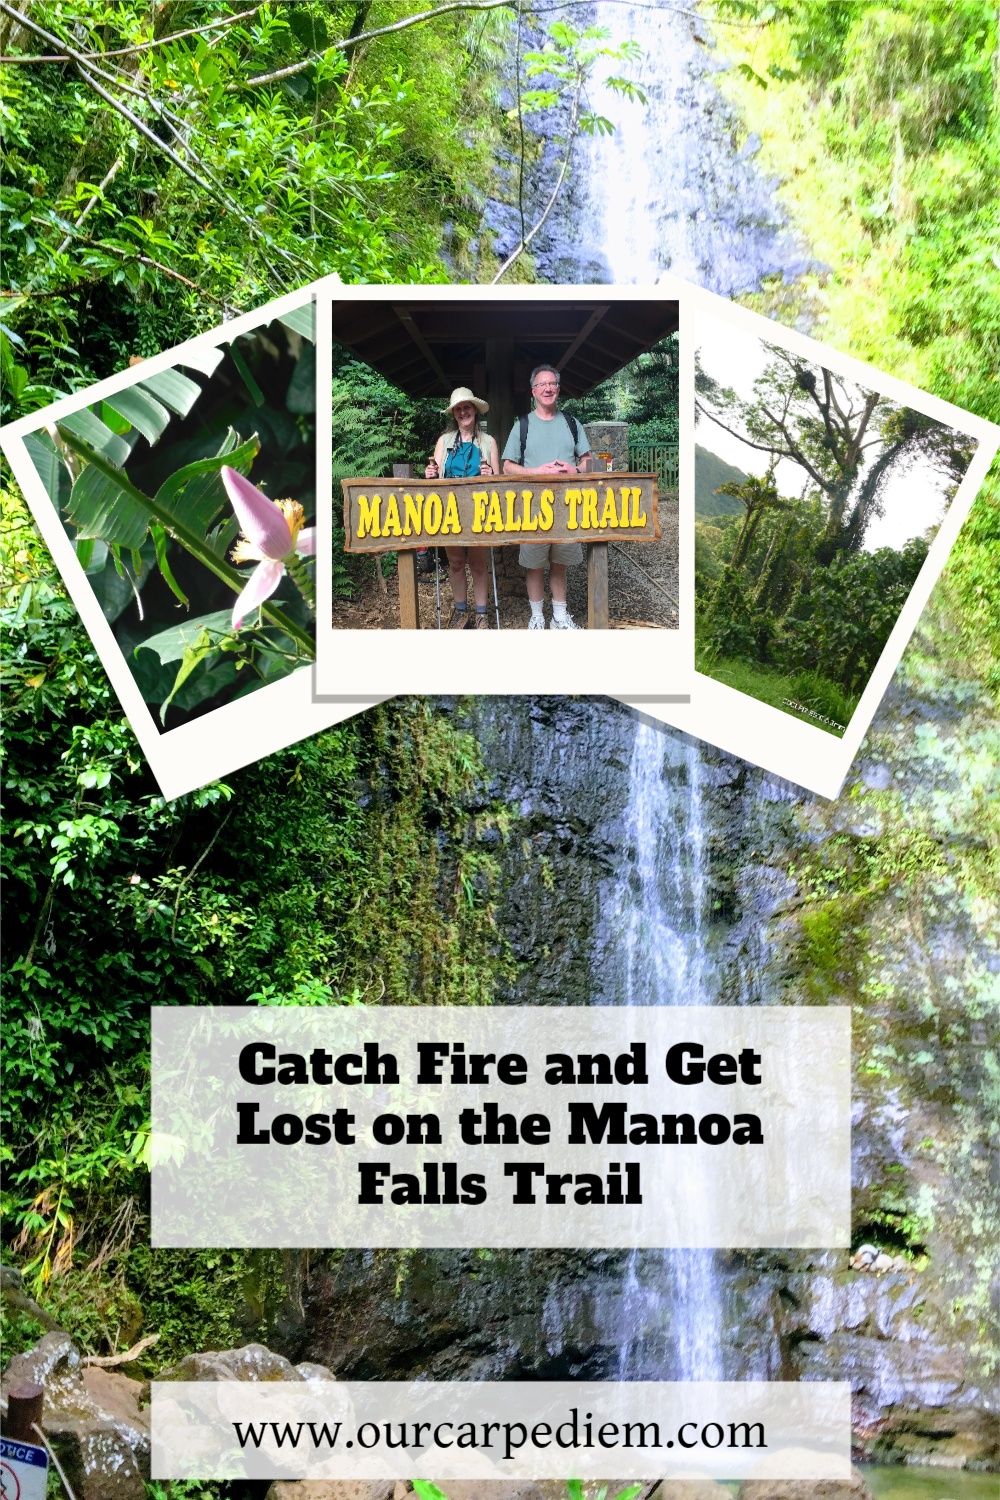 Catch Fire and Get Lost on the Manoa Falls Trail